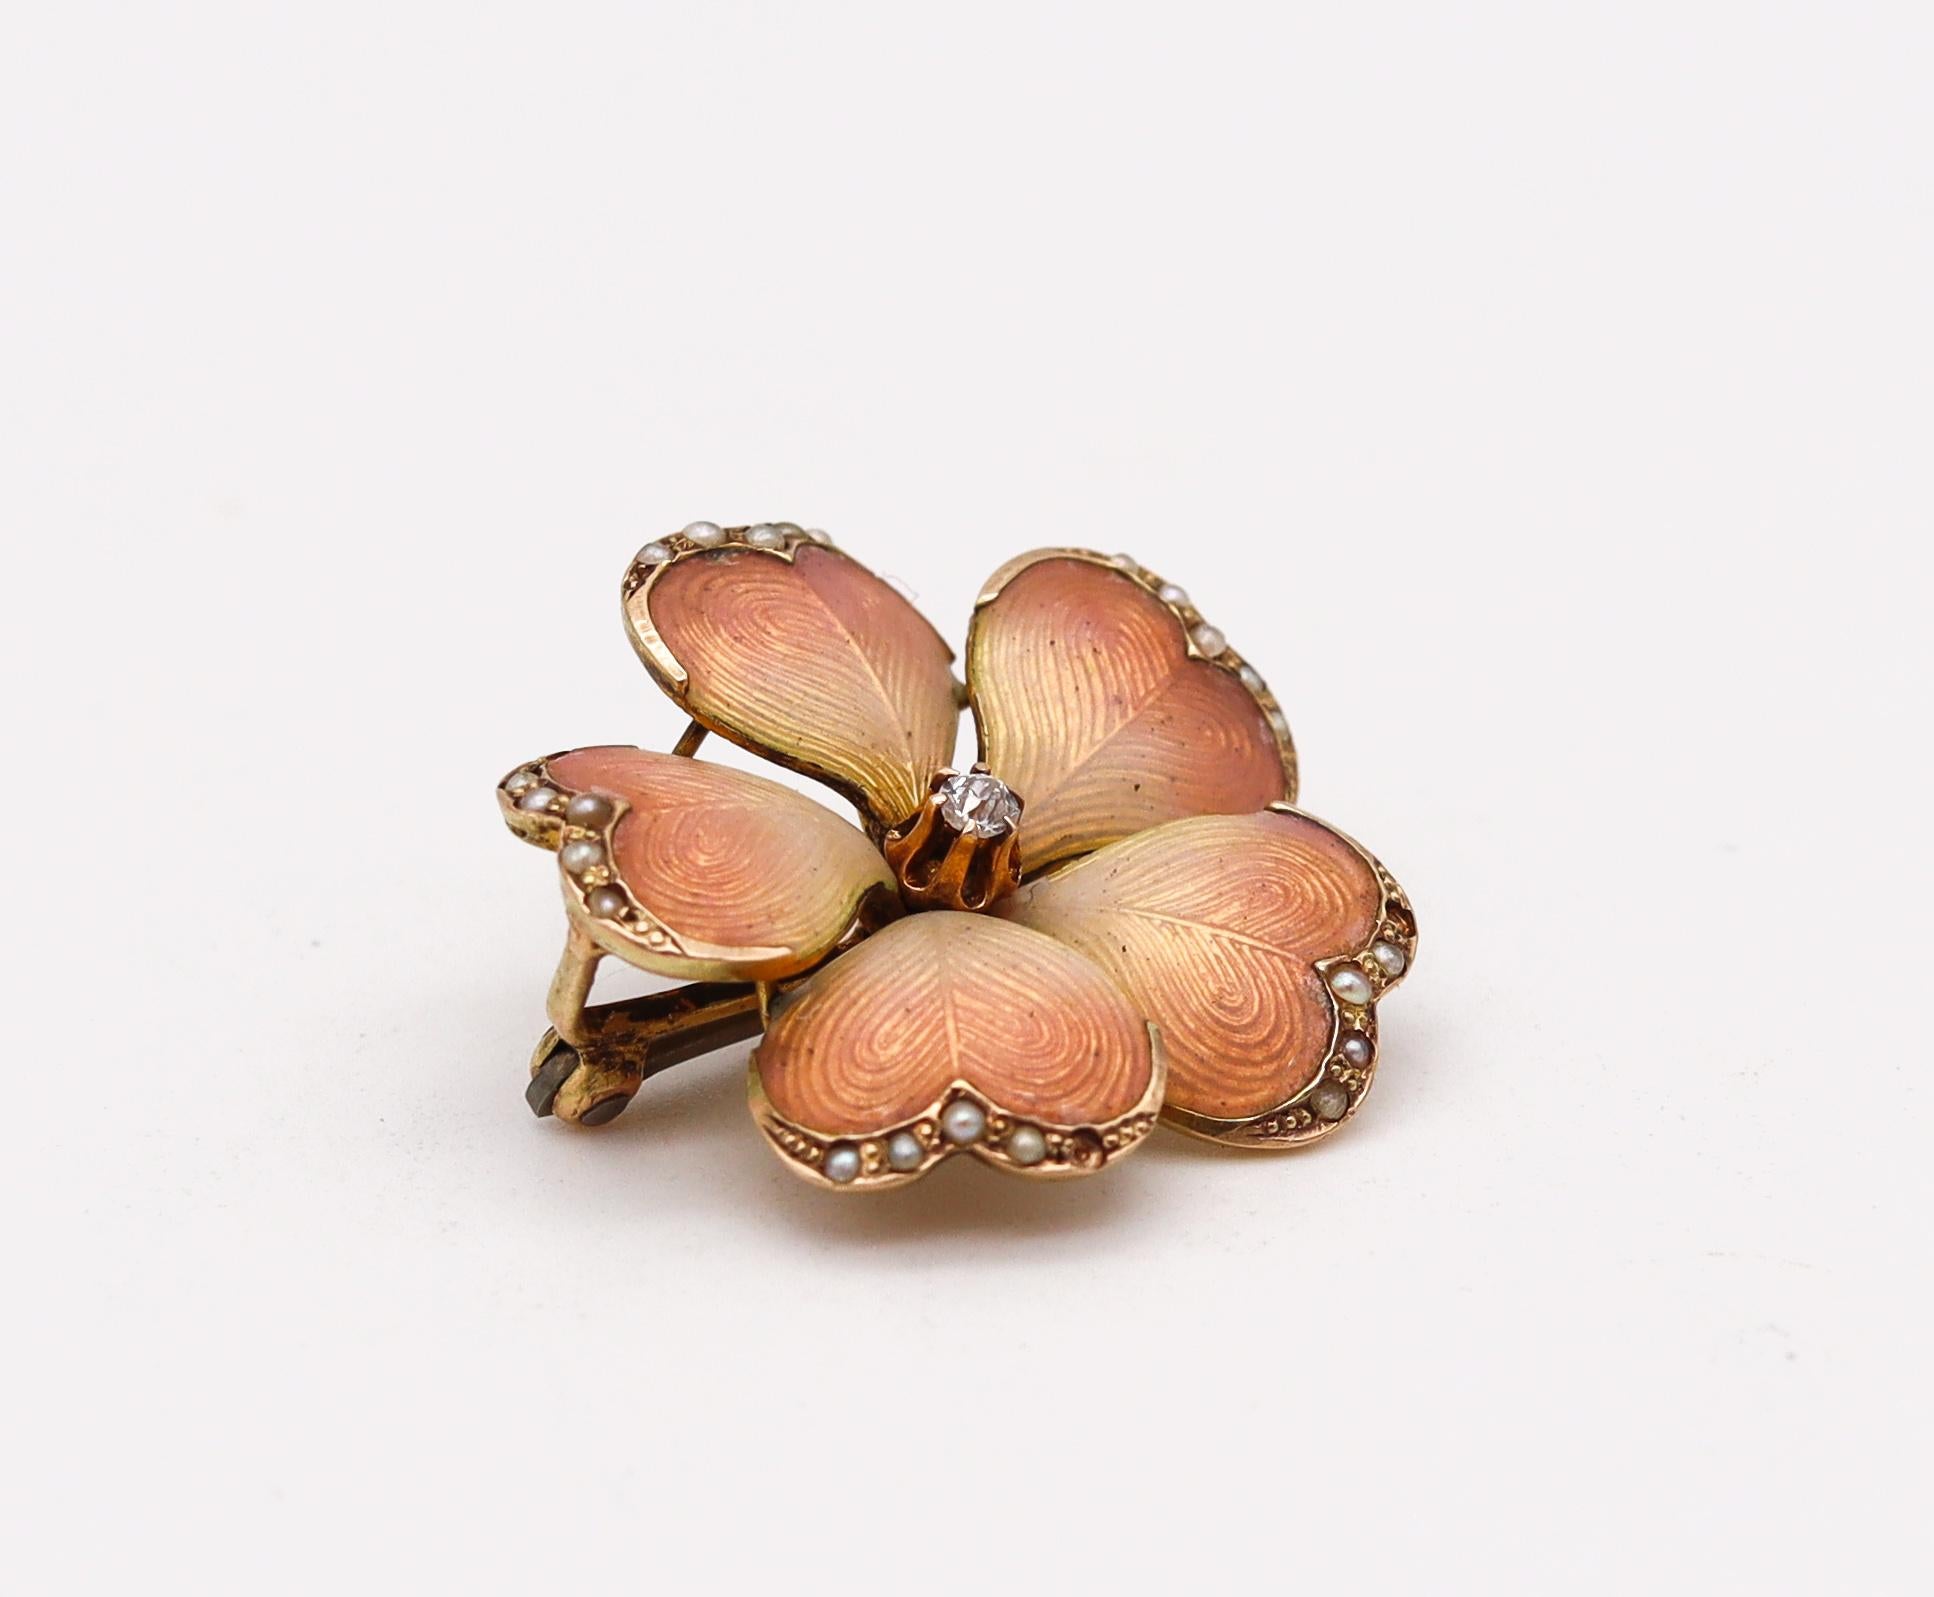 Edwardian enameled white Orchid convertible brooch.

Beautiful three-dimensional piece, created in America during the Edwardian and the Art Nouveau periods, between the 1901-1910. This beautiful pin brooch has been carefully crafted in solid yellow